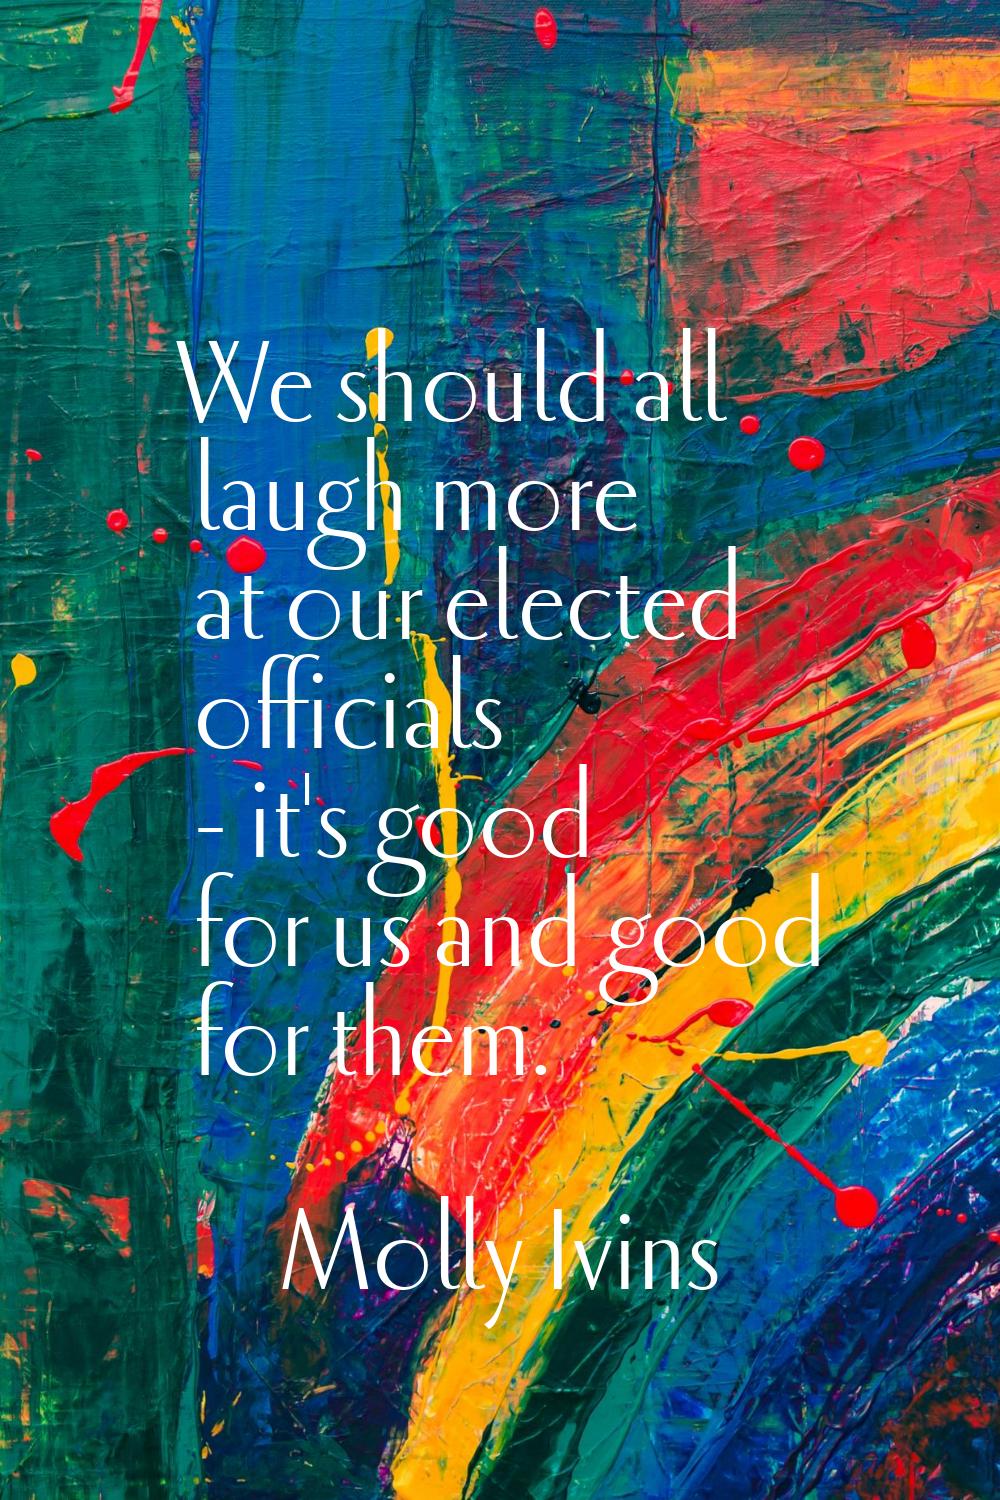 We should all laugh more at our elected officials - it's good for us and good for them.